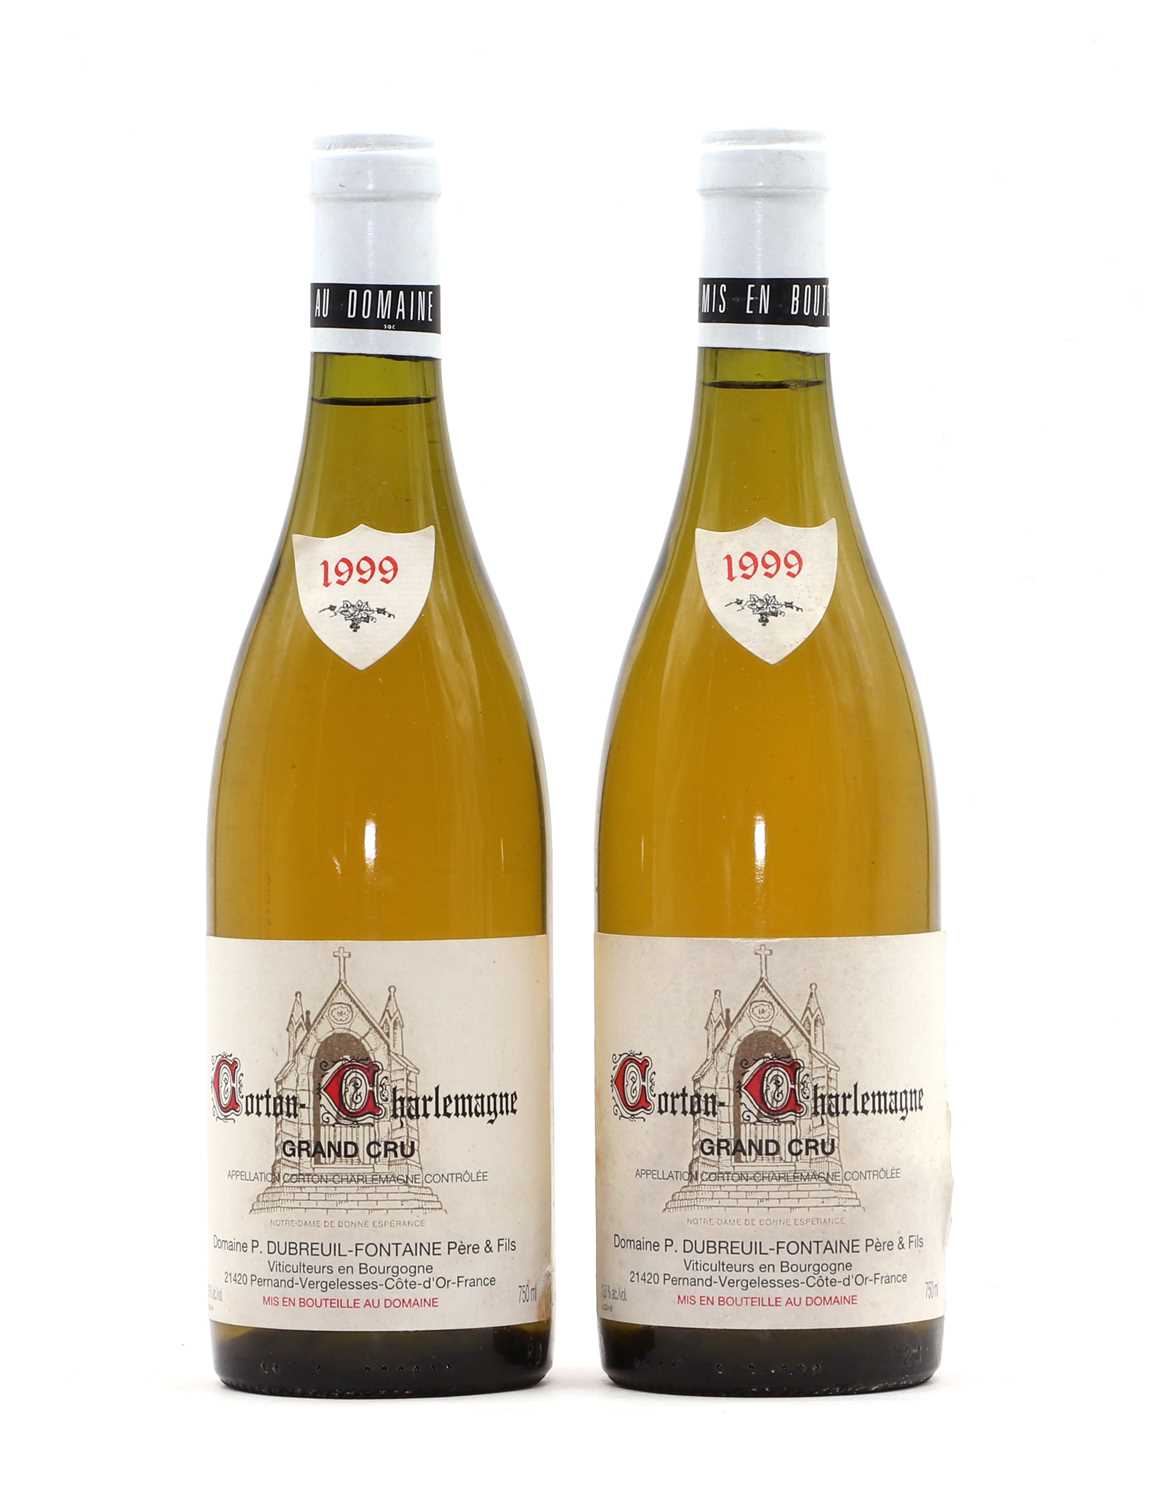 Corton-Charlemagne, Grand Cru, Domaine P. Dubreuil-Fontaine Pere & Fils, 1999 (2)